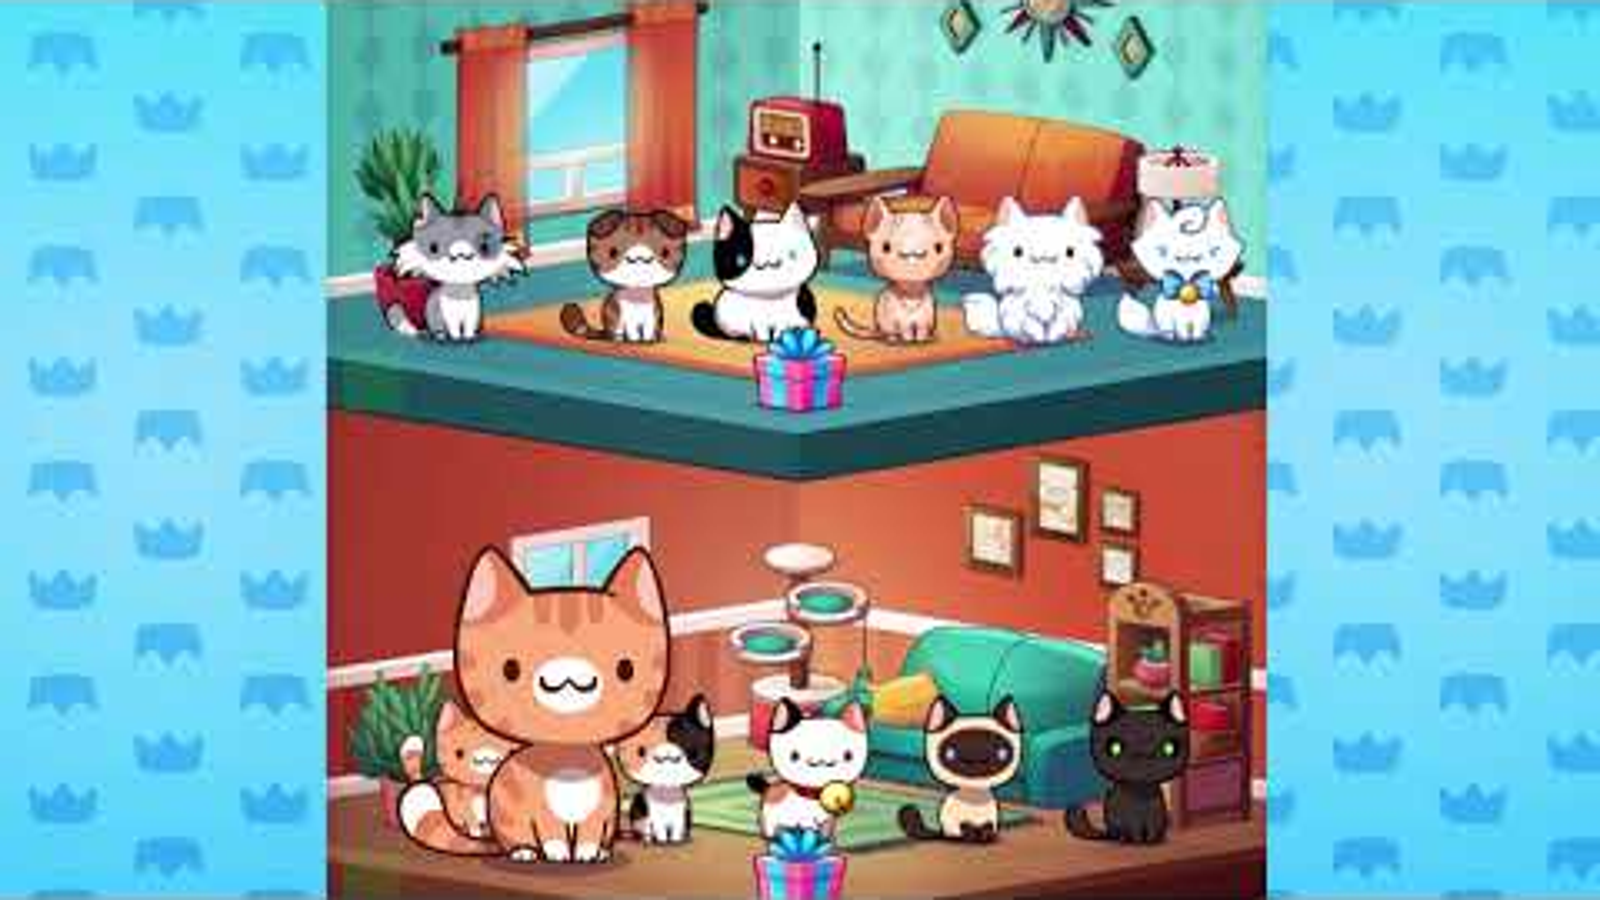 Tilting Point invests $30m into Mino Games' Cat Game